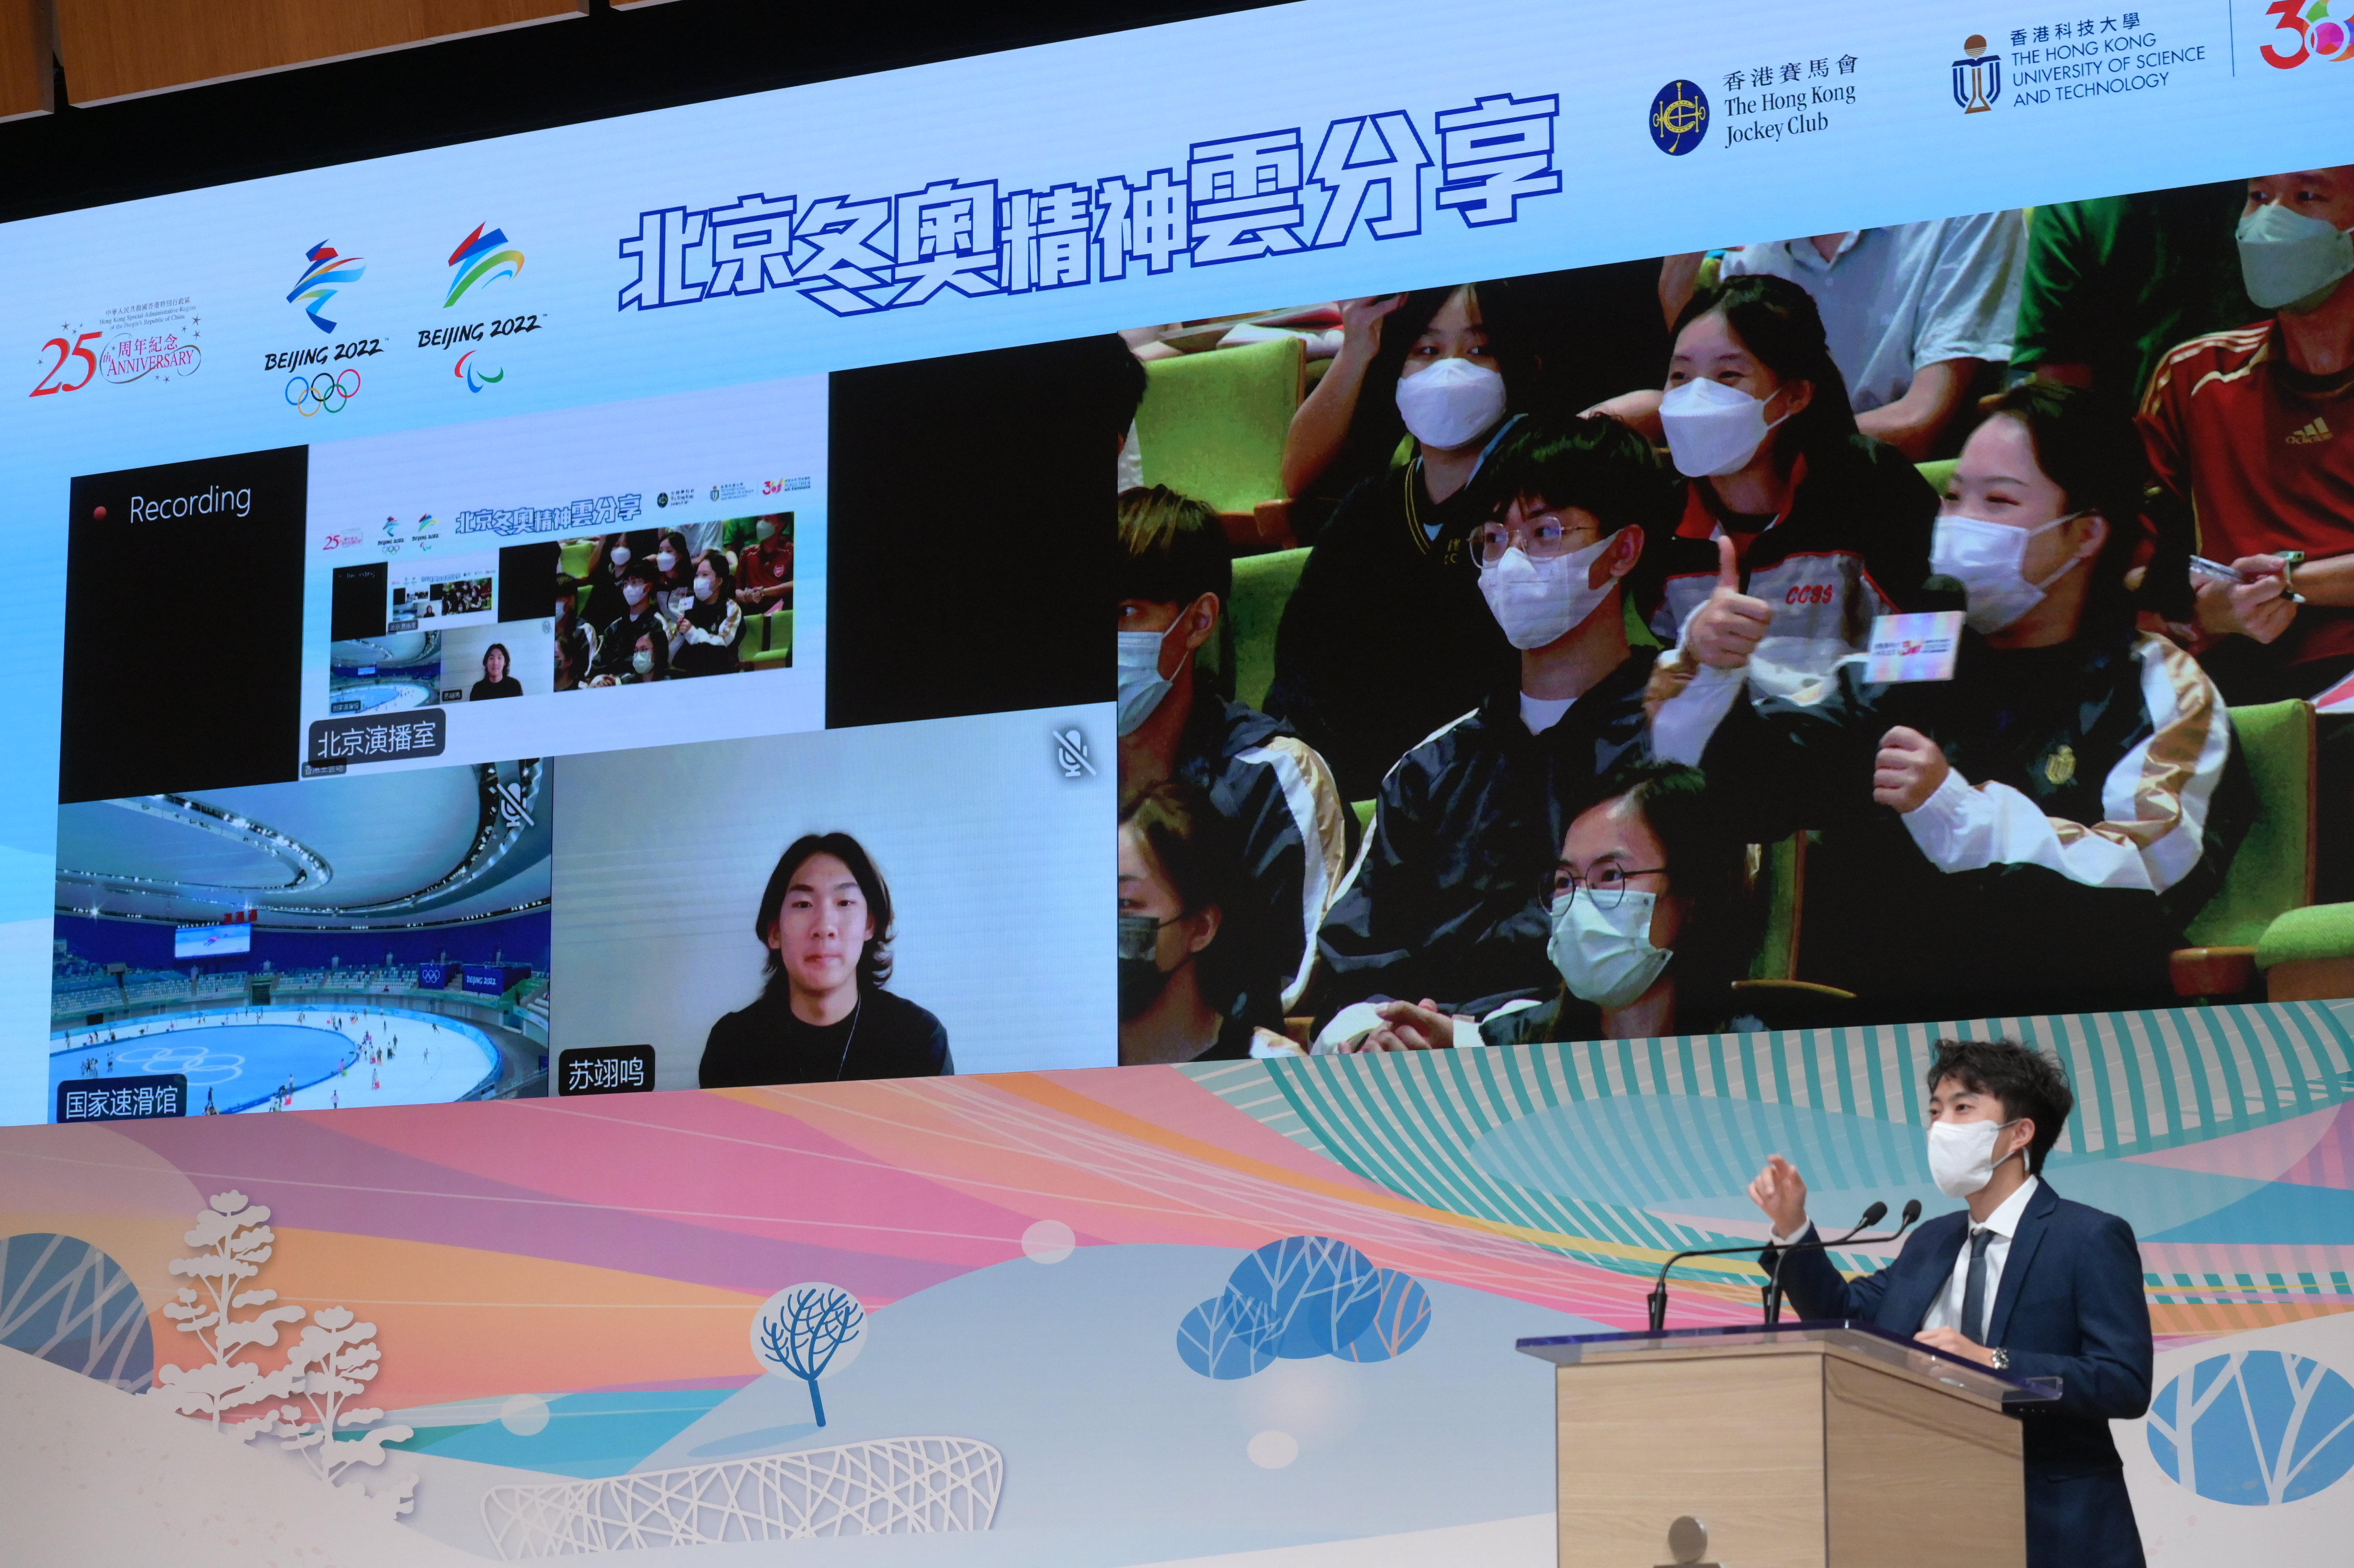 More than 400 attendants get to exchange with a team of seven comprising national and Hong Kong Olympians, staff and volunteers of the Olympic Winter Games Beijing 2022.